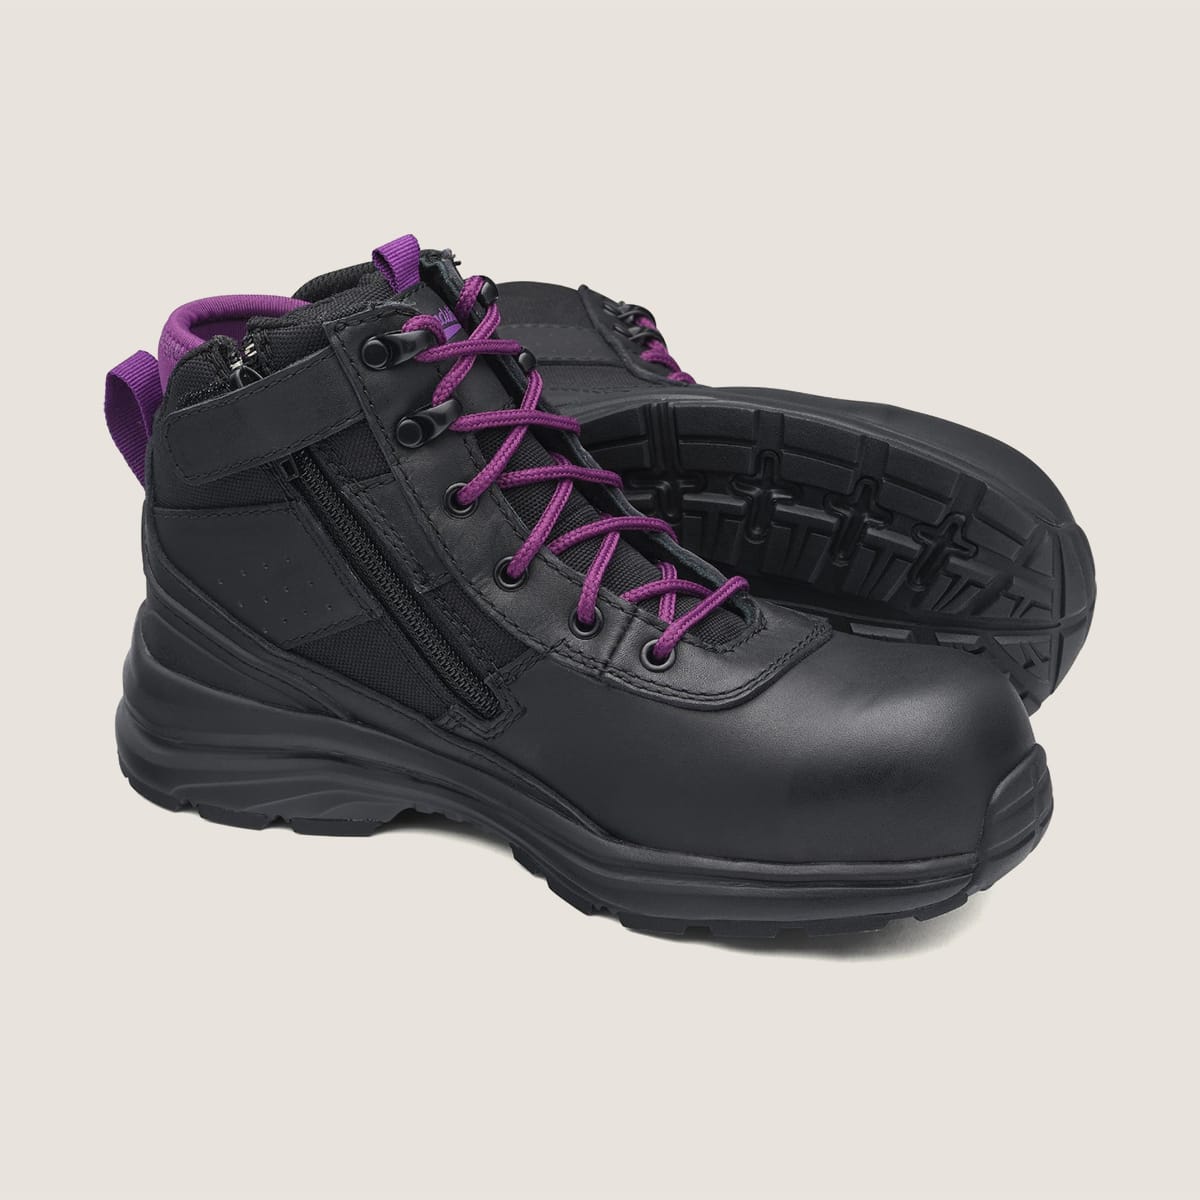 Women's Safety Toe Boots 